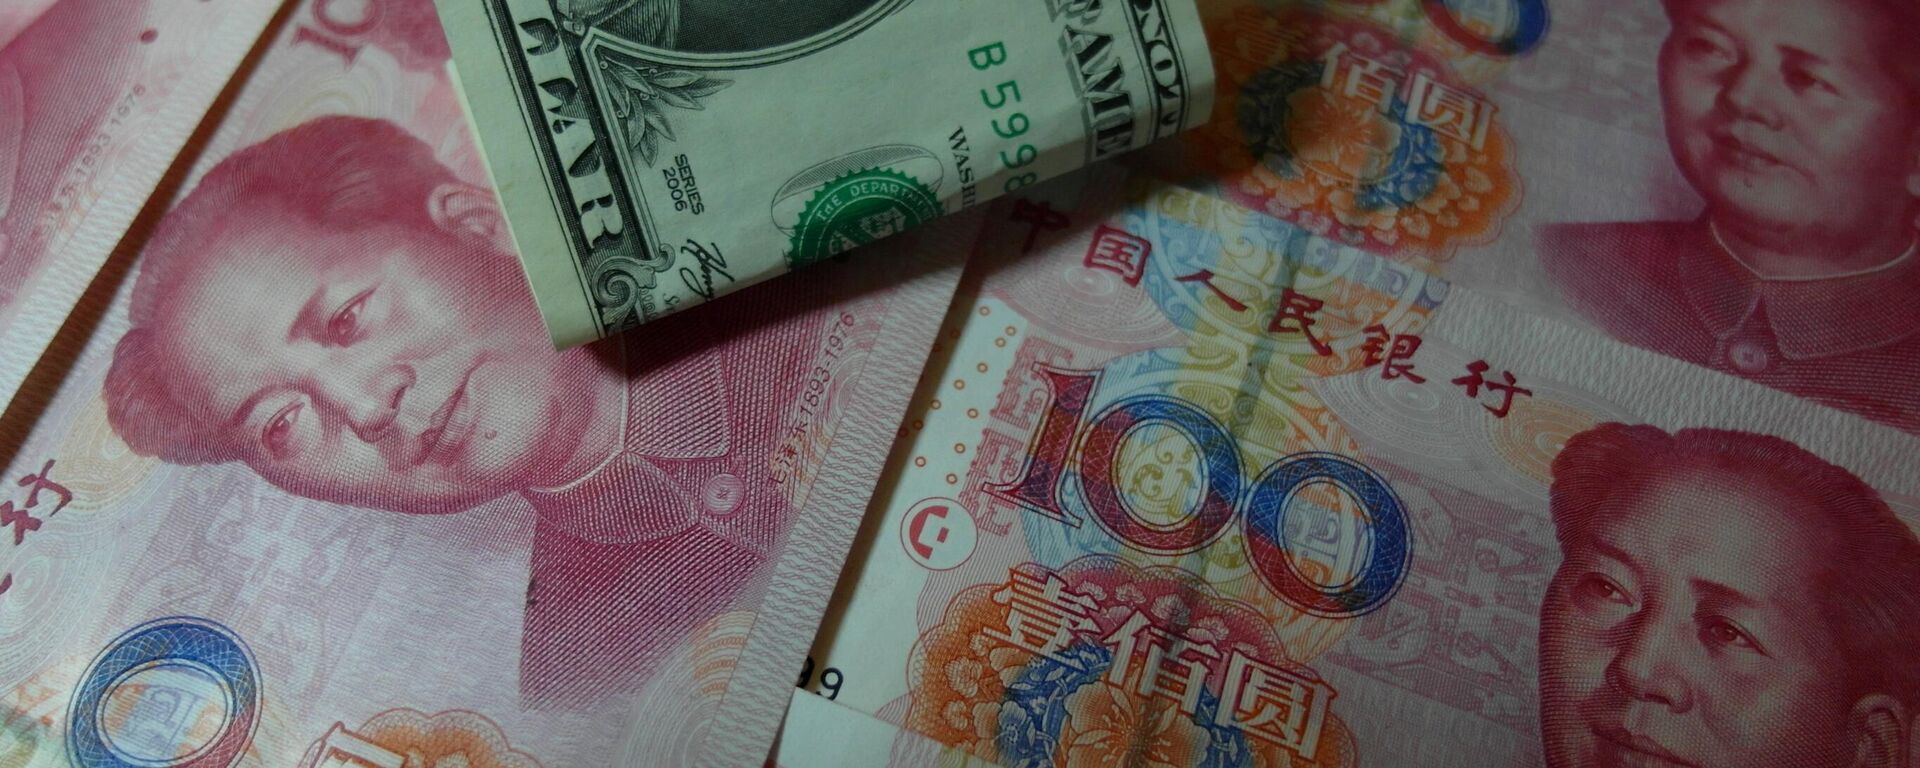 Yuan banknotes and US dollars are seen on a table in Yichang, central China's Hubei province on August 14, 2015 - Sputnik Africa, 1920, 19.05.2023